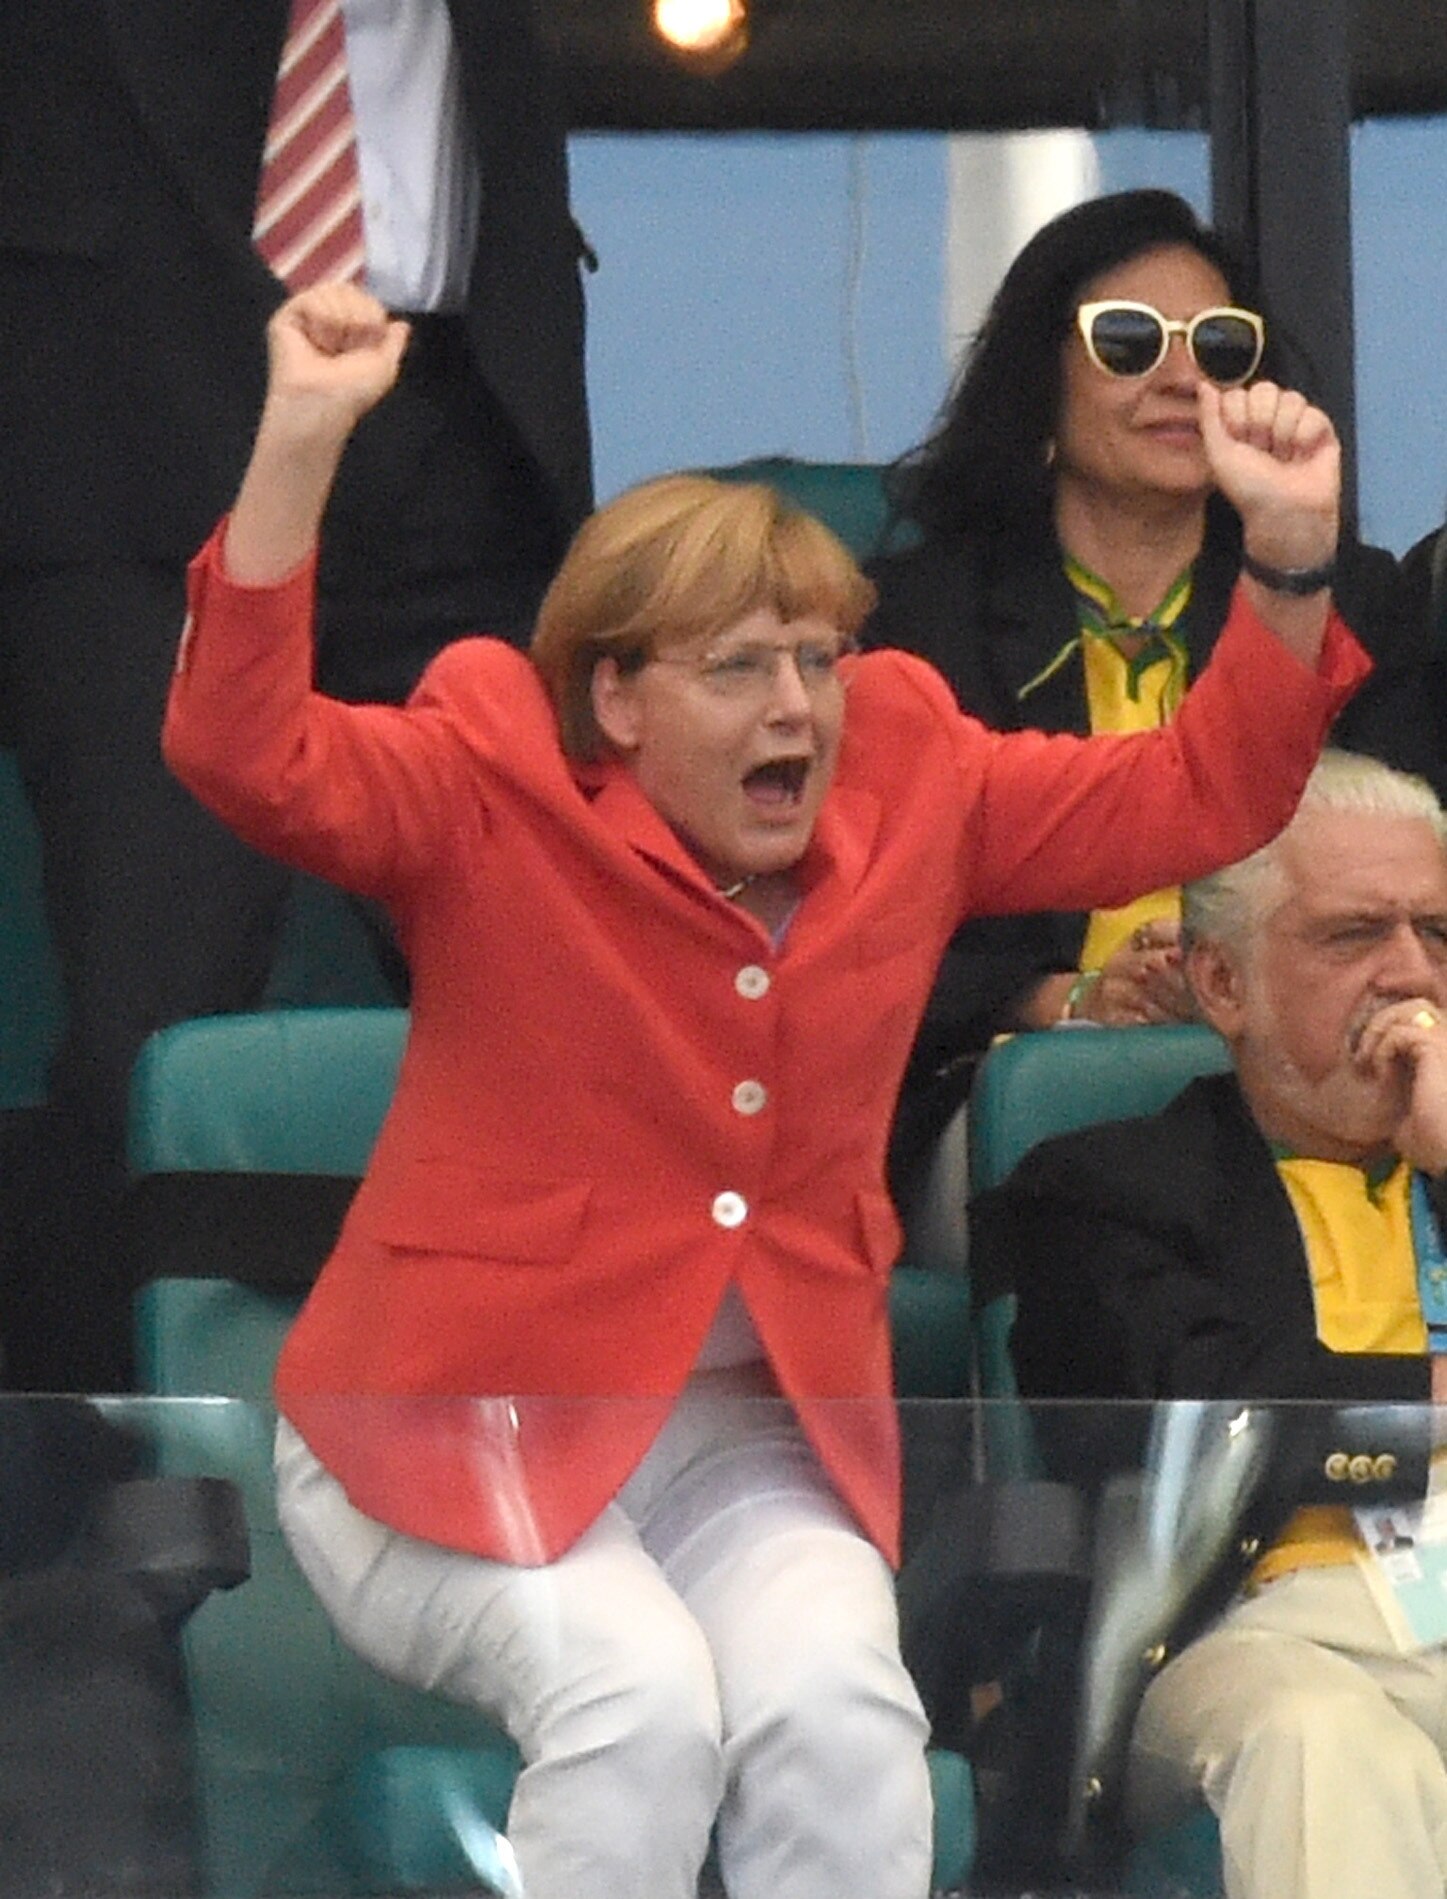 Angela Merkel celebrates Germany's 2-0 goal in the FIFA World Cup 2014 match between Germany and Portugal